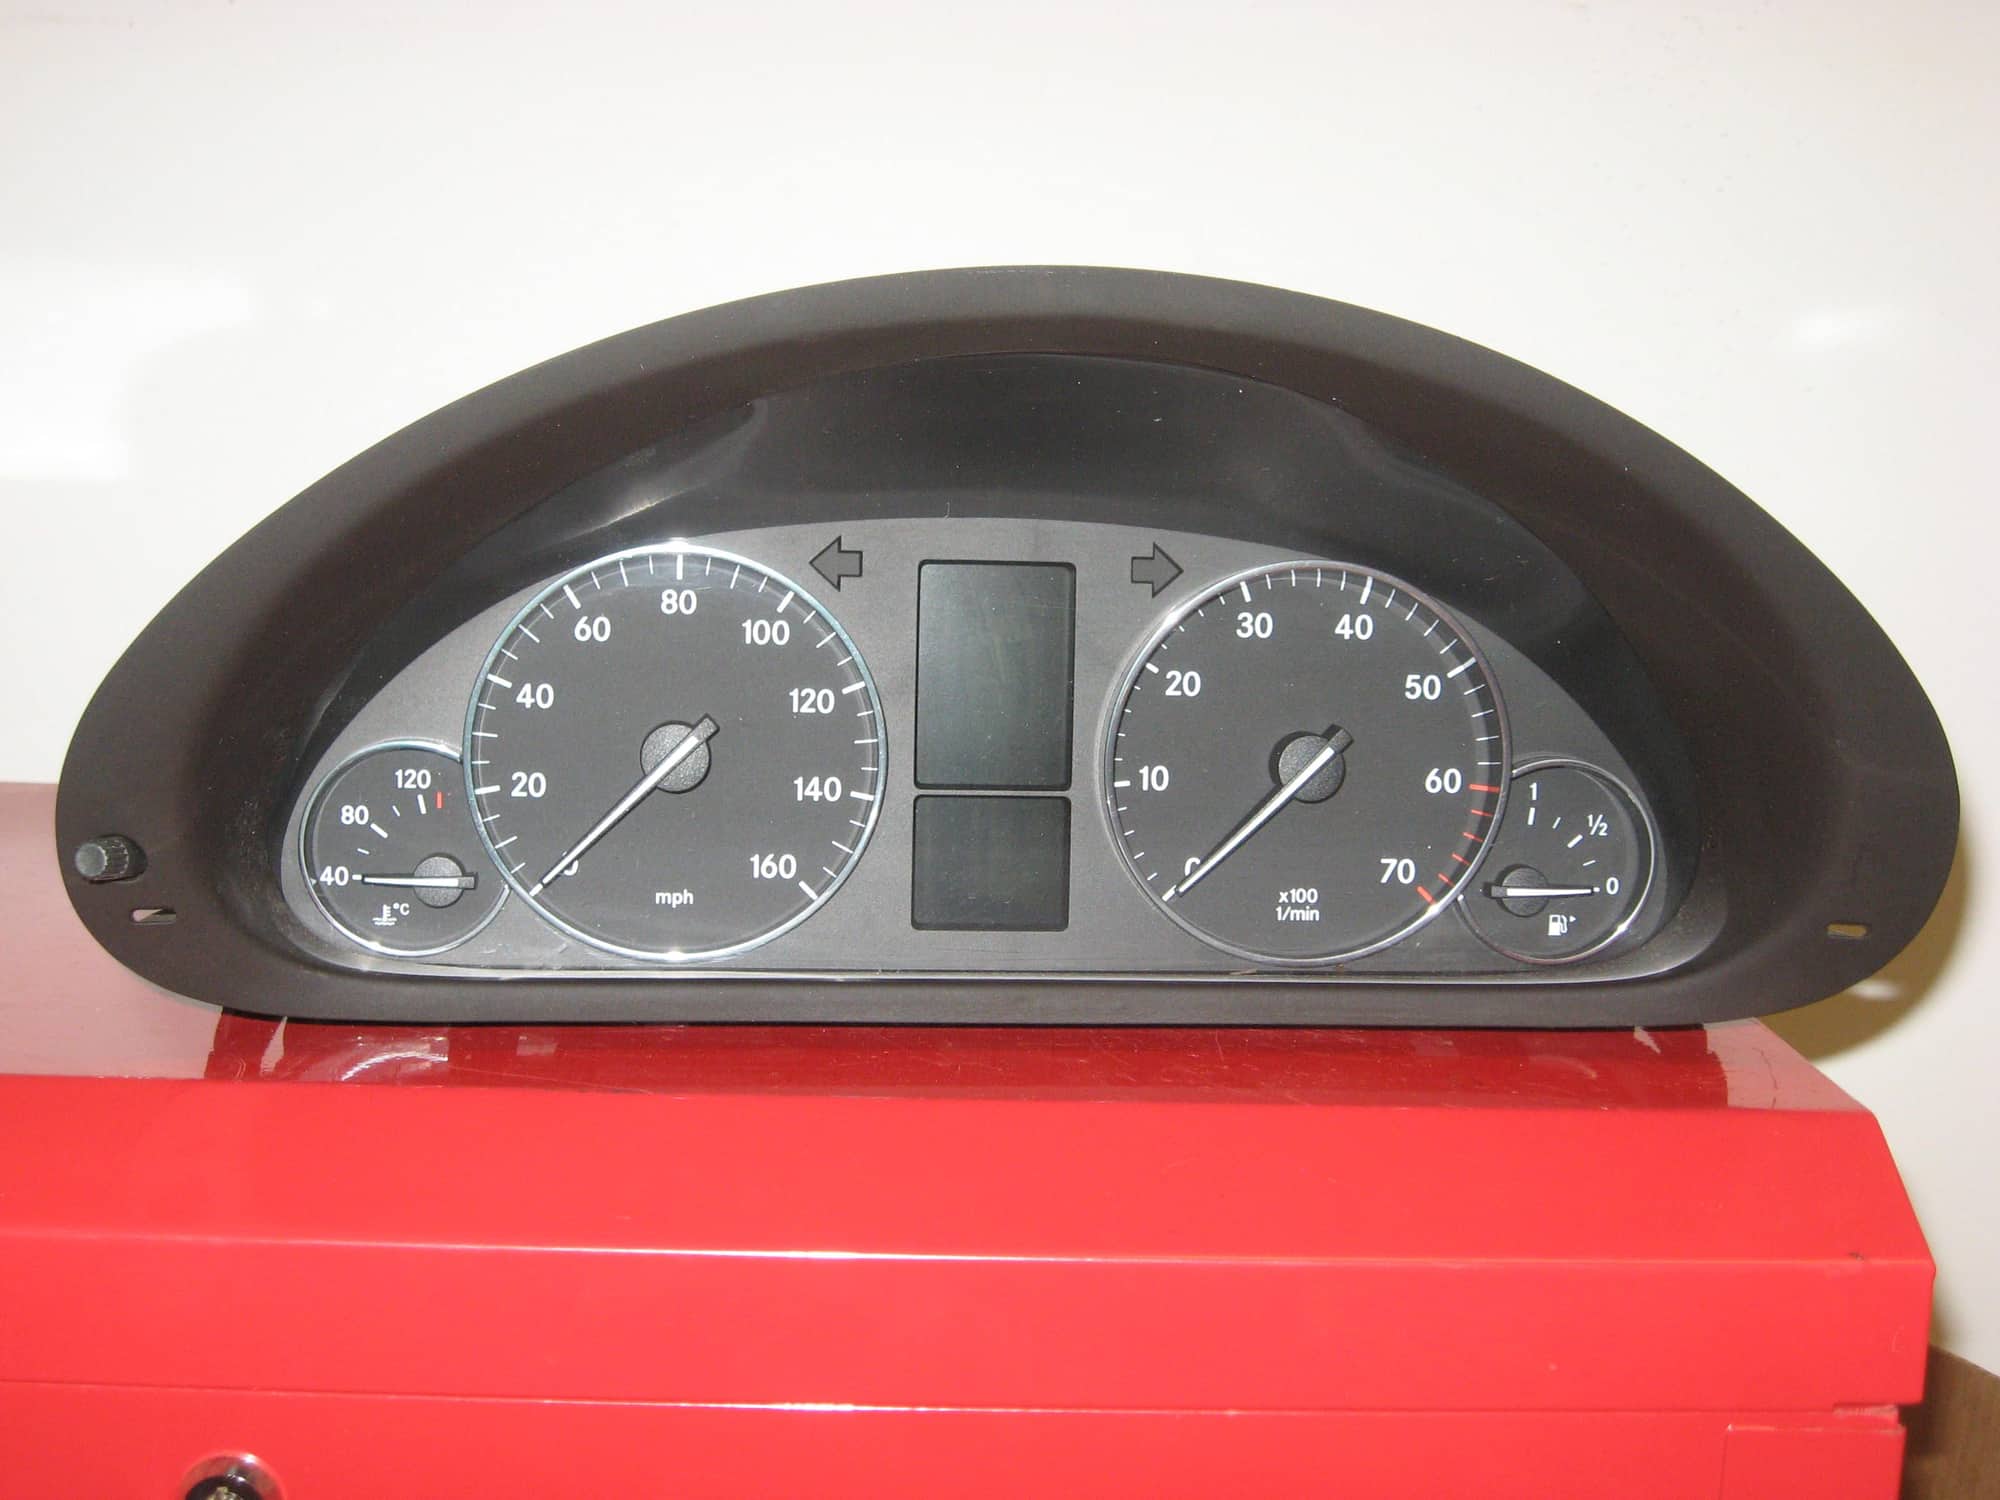 2005 C230 Instrument Cluster Can Be Adapted to Work in